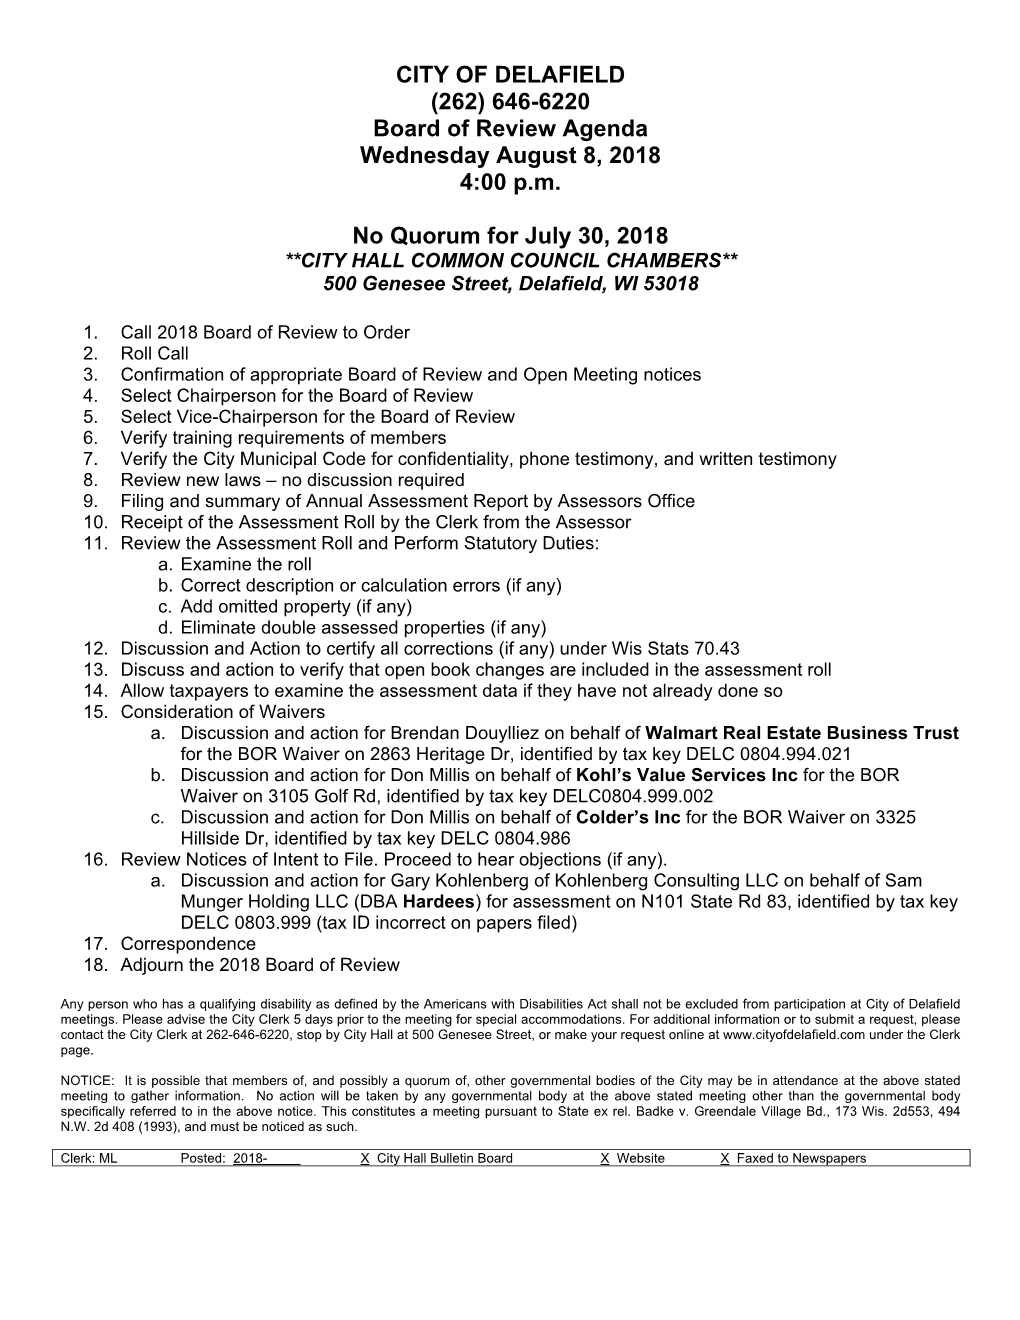 CITY of DELAFIELD (262) 646-6220 Board of Review Agenda Wednesday August 8, 2018 4:00 P.M